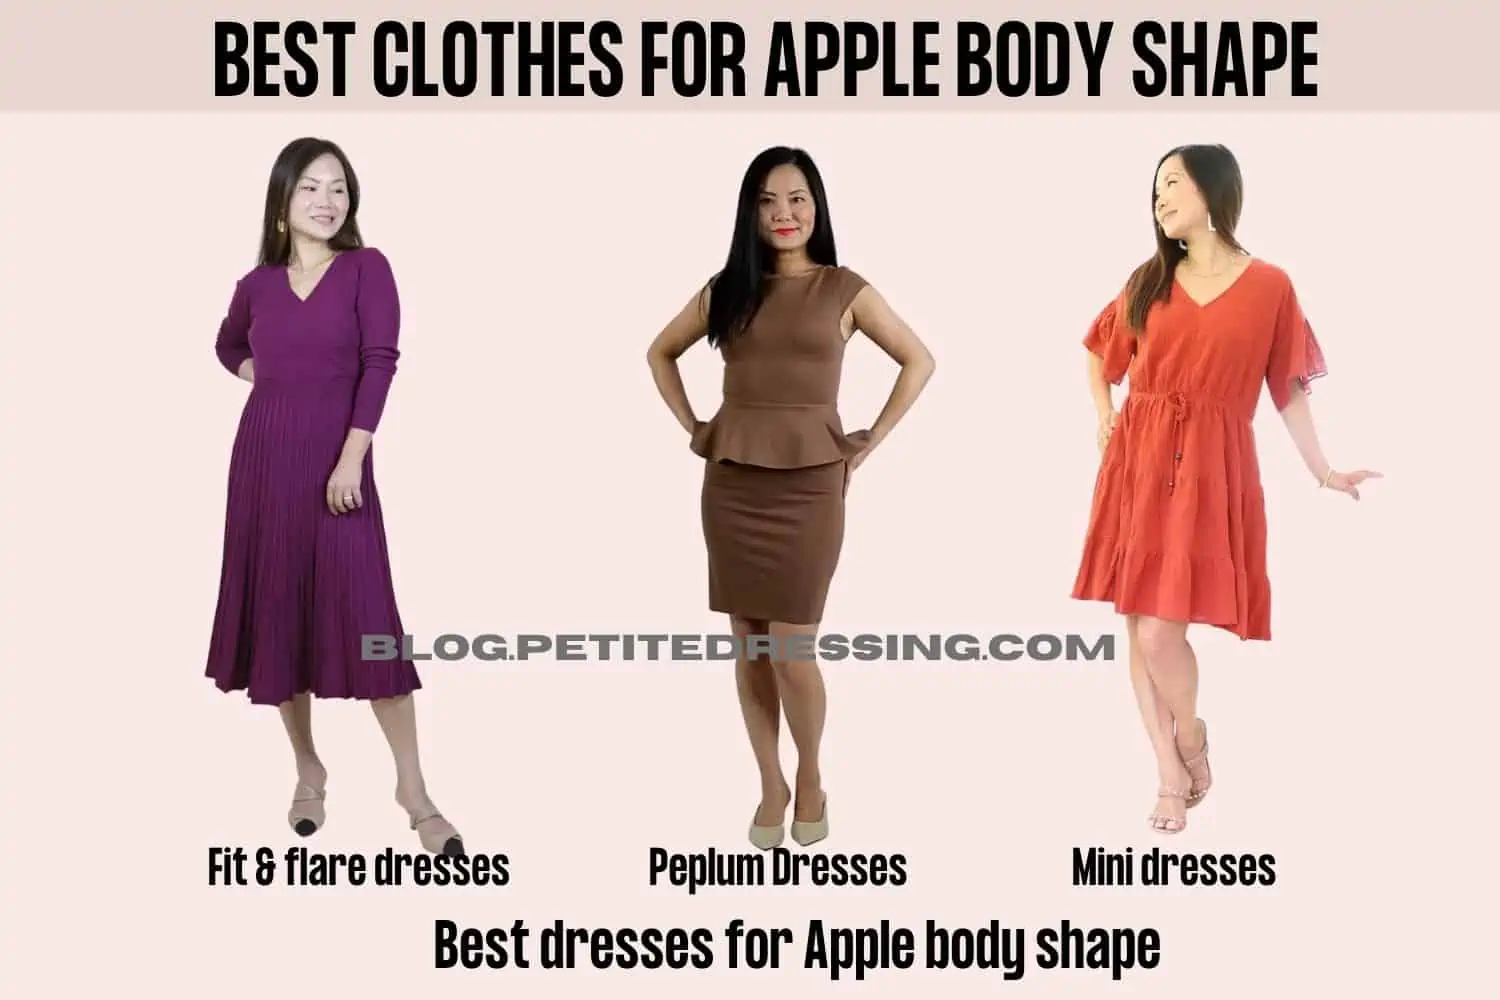 The Complete Dress Guide for Apple Body Shape - Petite Dressing